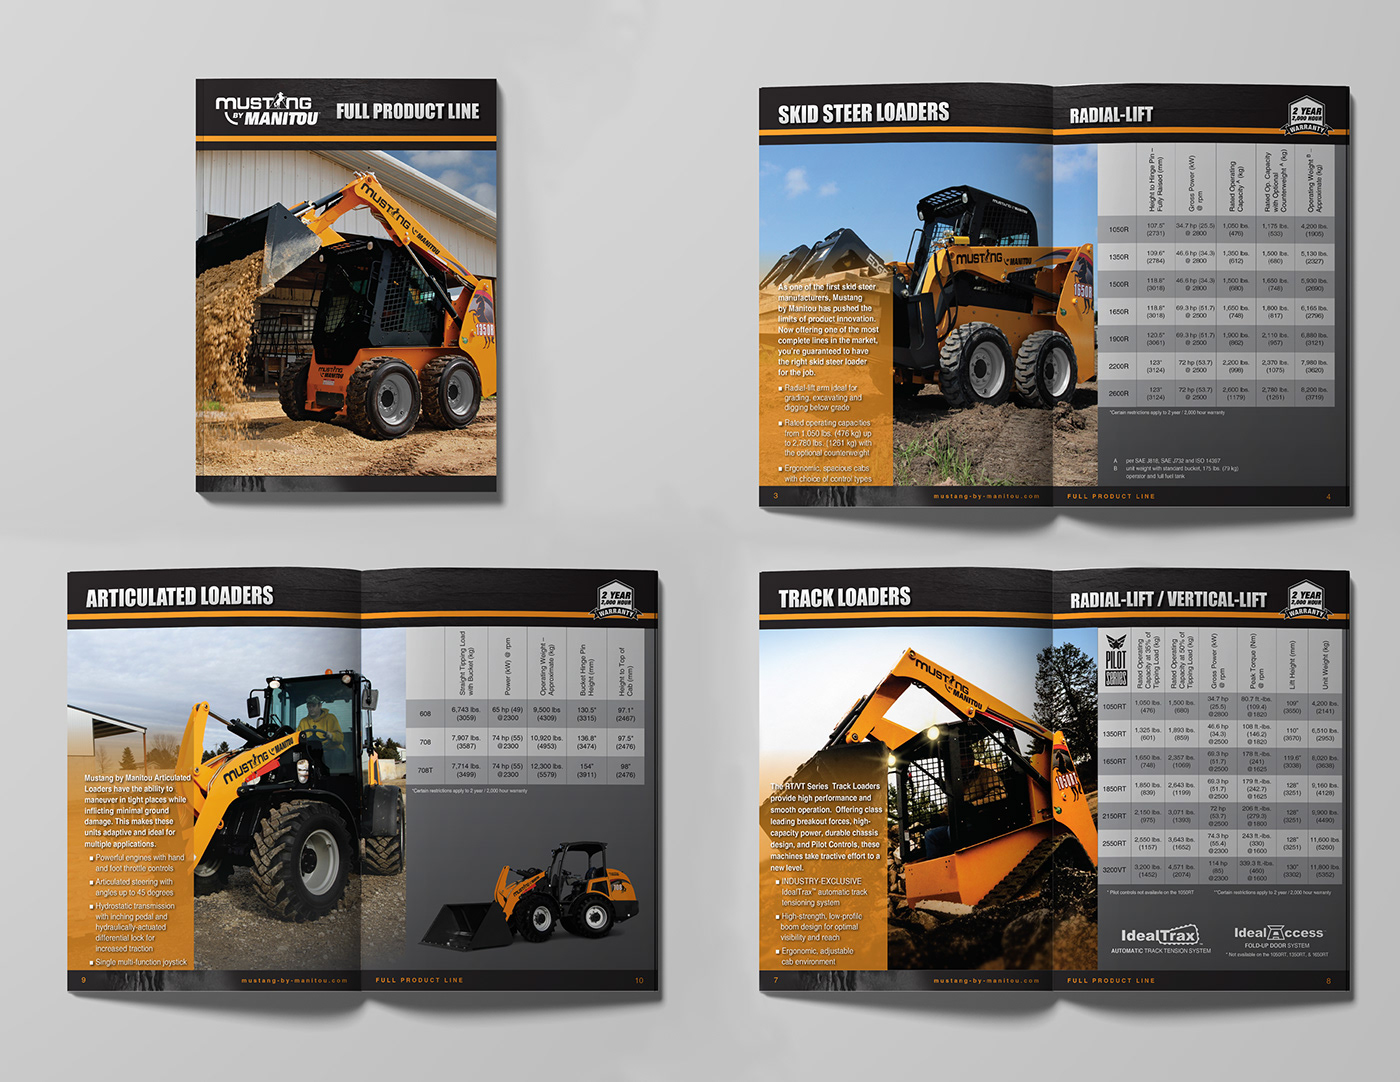 manitou Gehl Booklet brochure Layout design construction page layout equipment Heavy